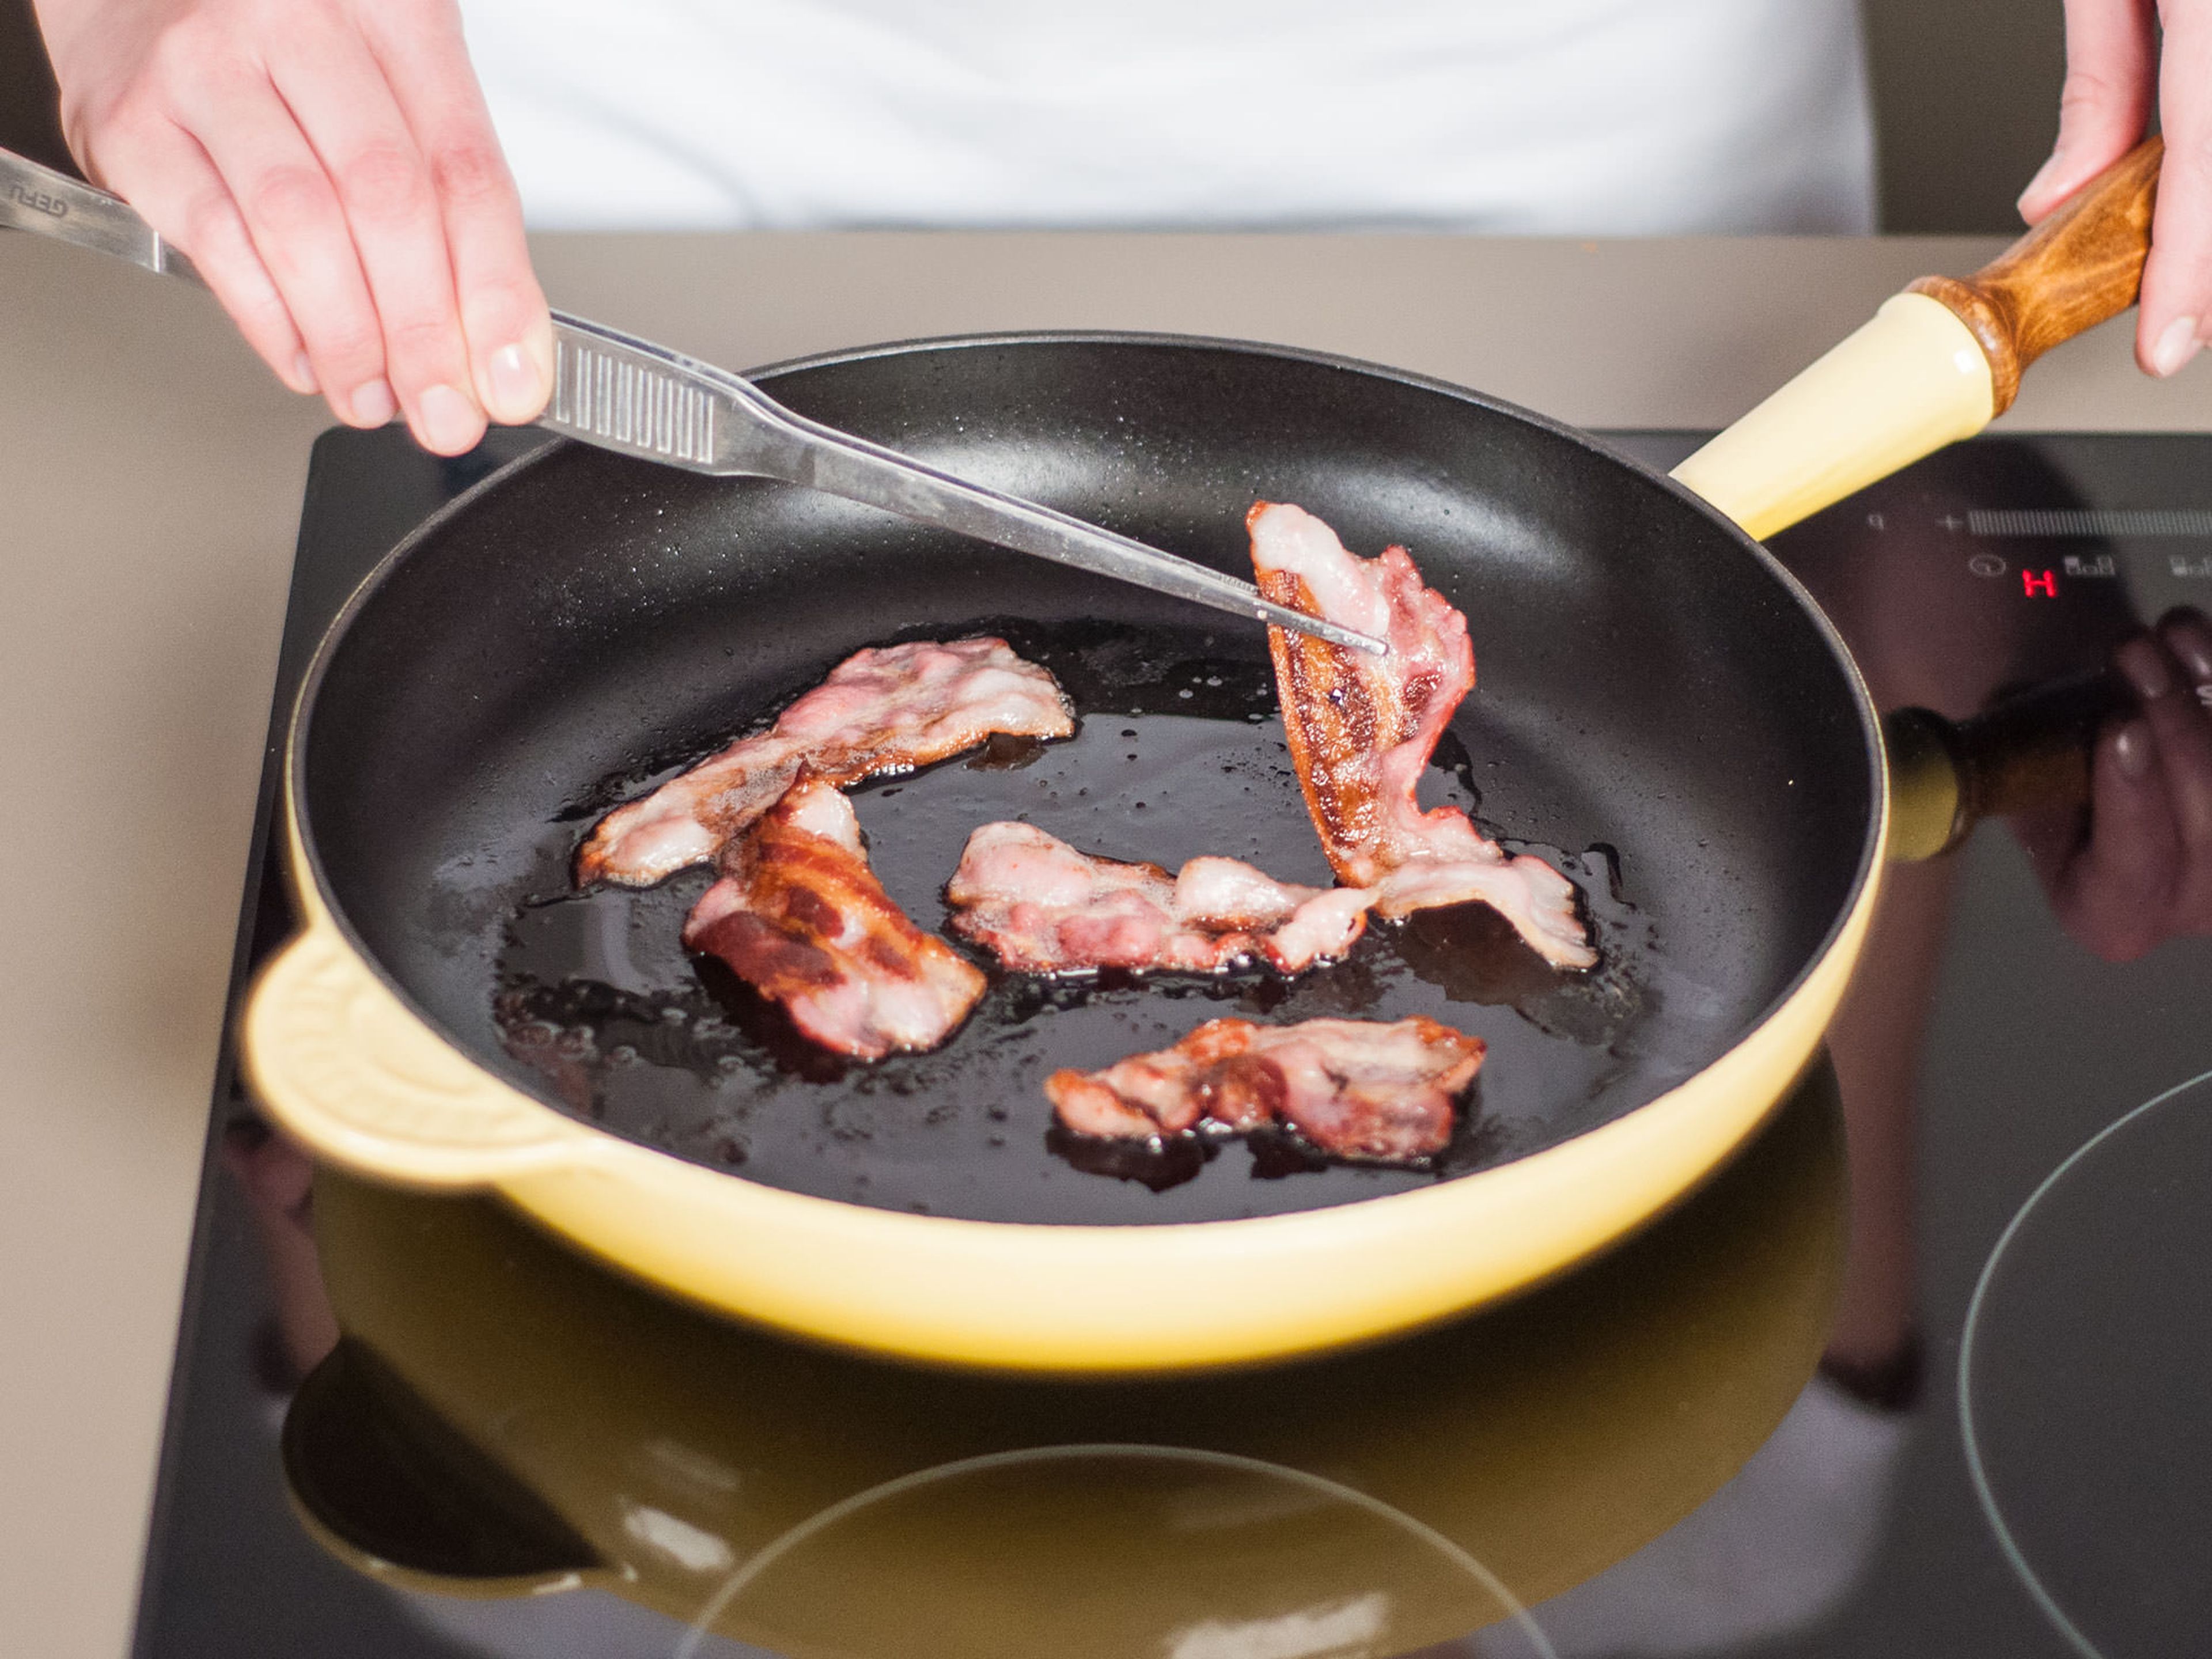 In a frying pan, sauté bacon over medium-low heat for approx. 5 - 8 min. until crisp and golden. Set aside.